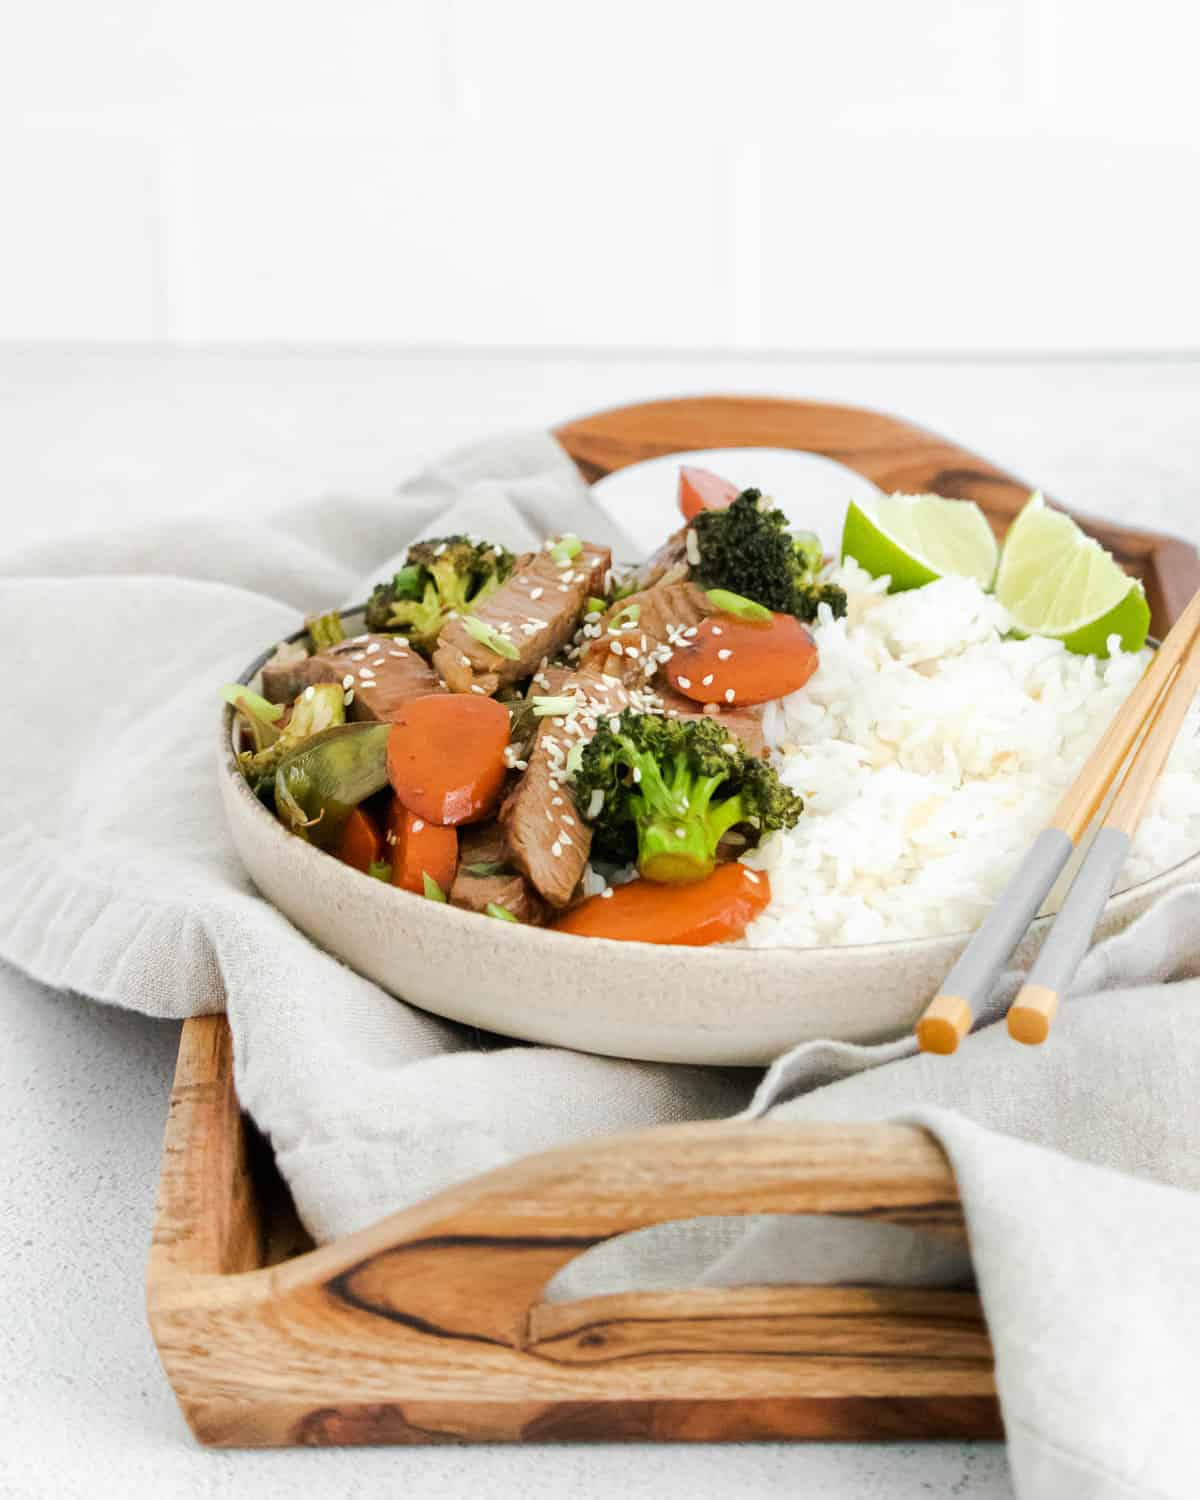 Bowl of rice, vegetables, steak, and sesame seeds on a tray with chopsticks.